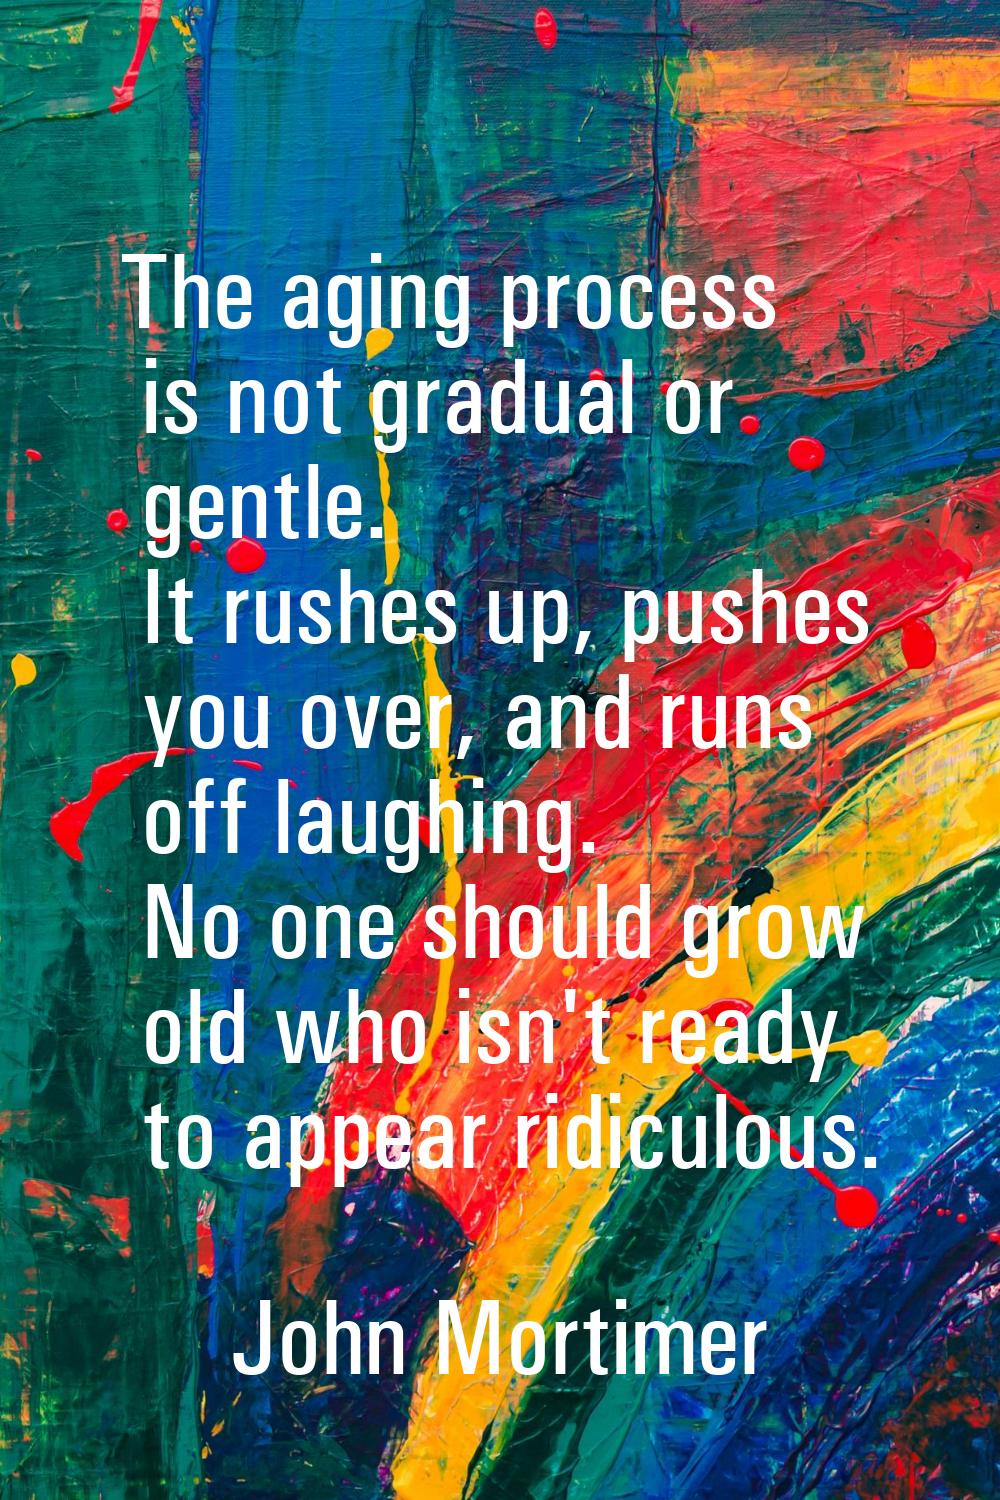 The aging process is not gradual or gentle. It rushes up, pushes you over, and runs off laughing. N